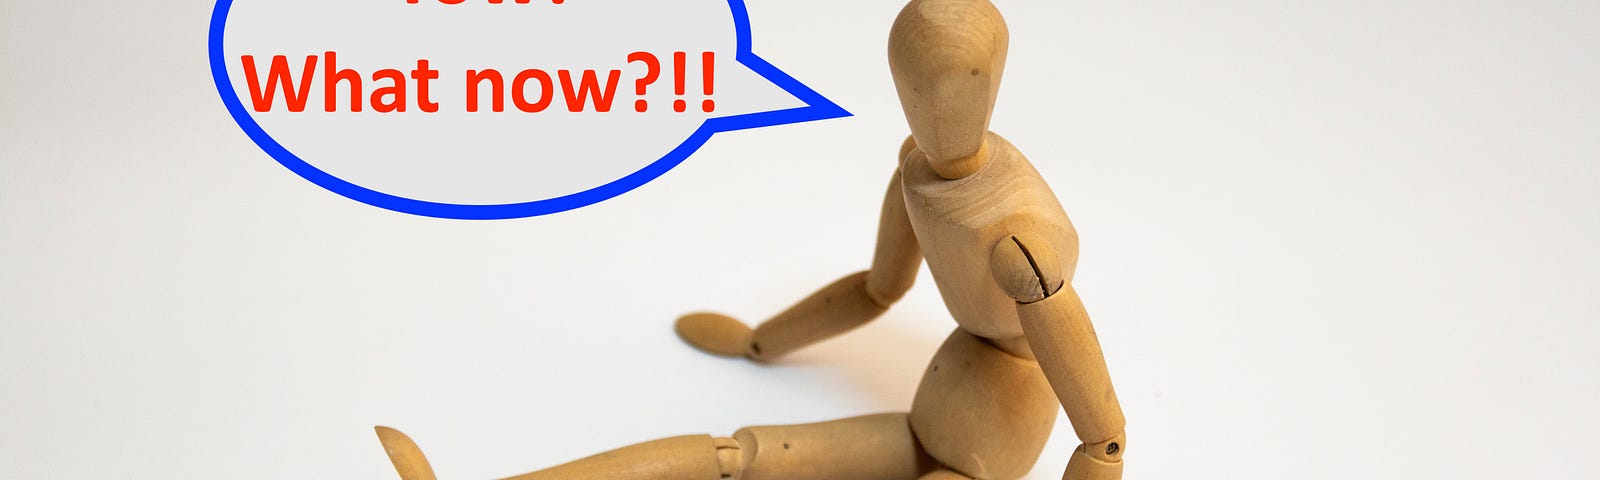 A wooden mannequin sits on the floor, legs outstretched. His speech bubble reads: “Yow! What now?!!”